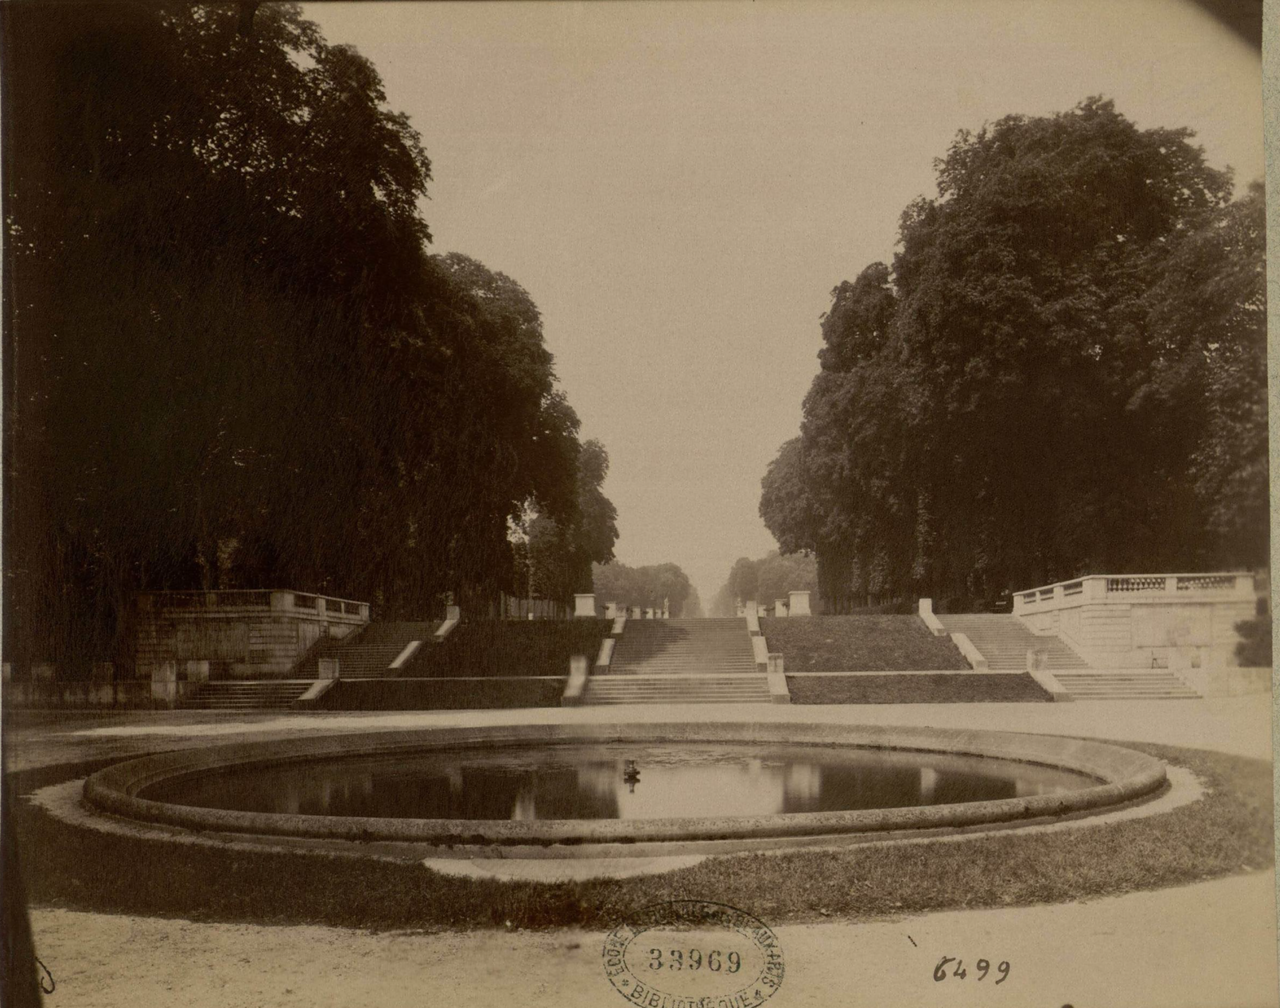 40 Vintage Photographs Illustrate an Old Paris in the Late 19th and ...